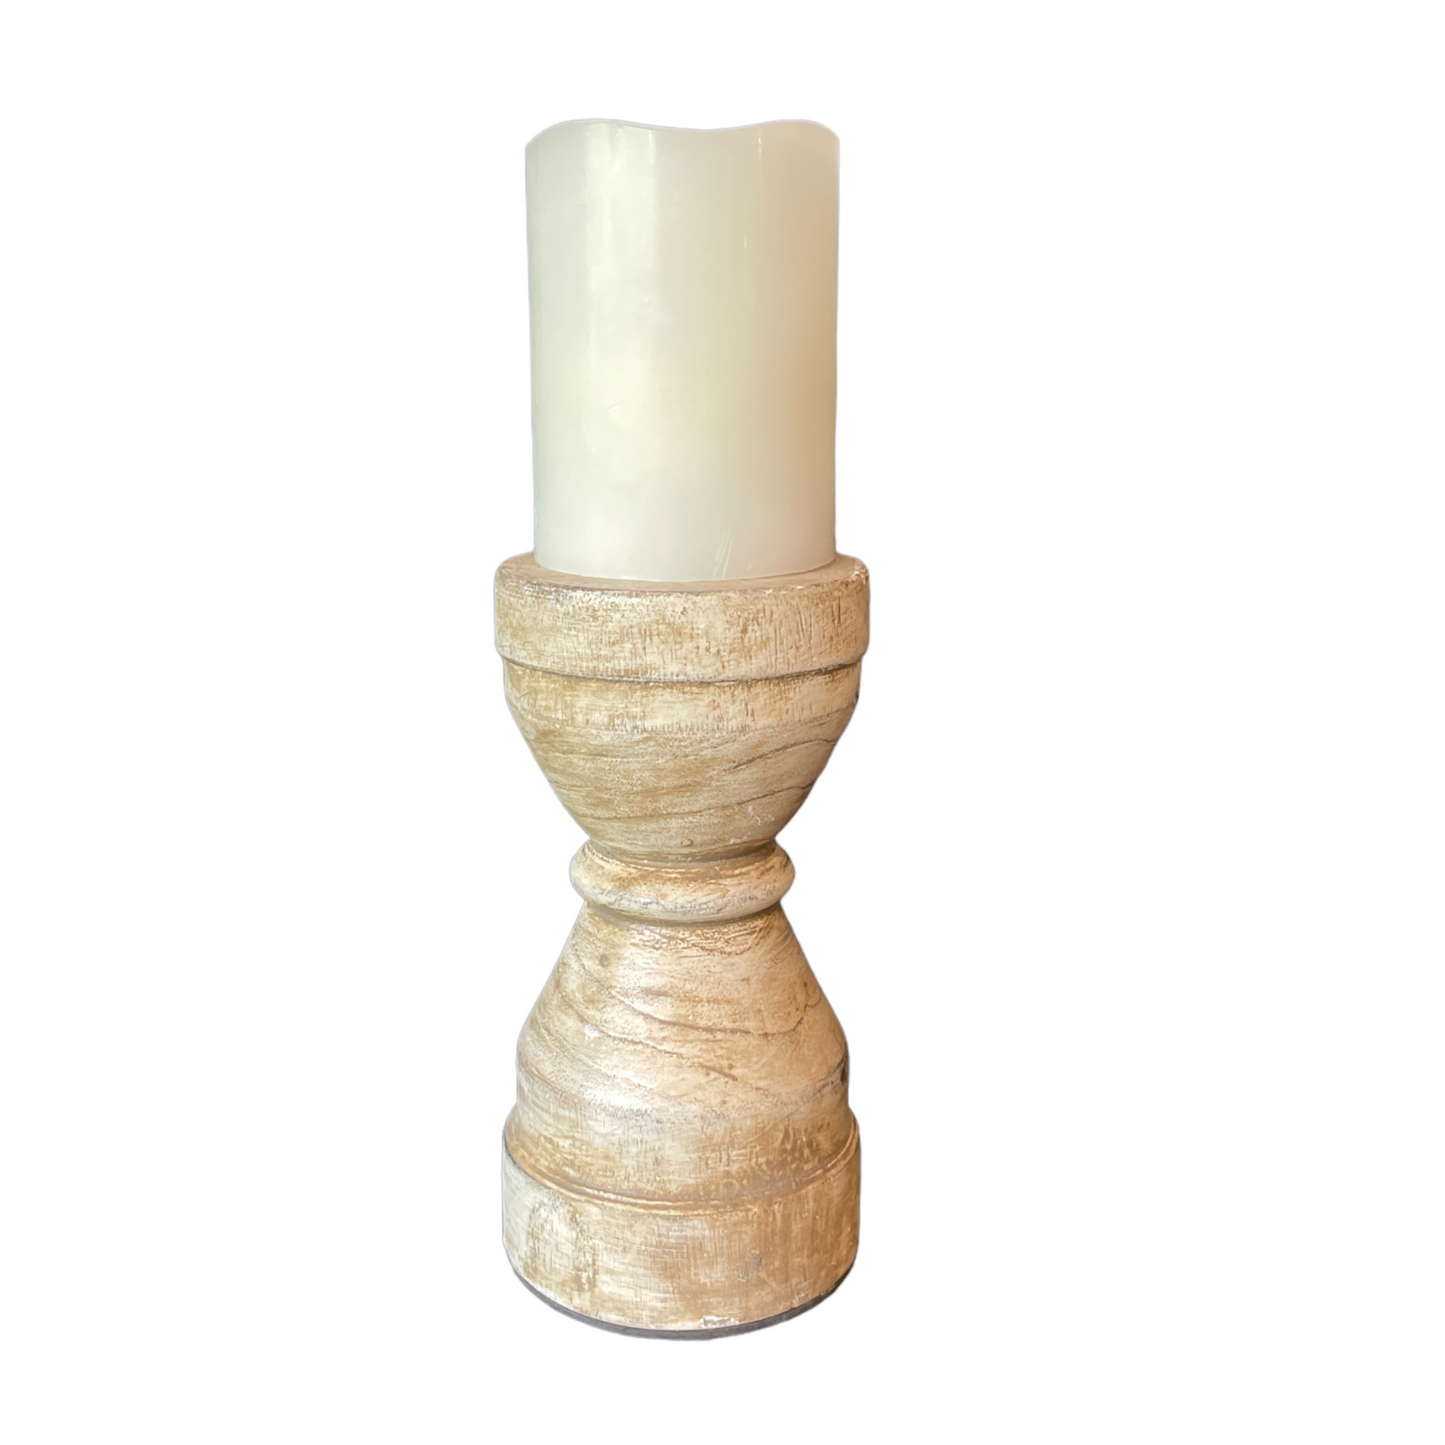 We love the chunky yet elegant Capri Cream Distressed Teak Candle Holder. Their soft curves and shapes accentuate the beauty of the natural recycled teak that have been gently distressed for vintage appeal. They are substantial enough to work on their own or as a beautiful collection of candle holders on a mantelpiece or a table.